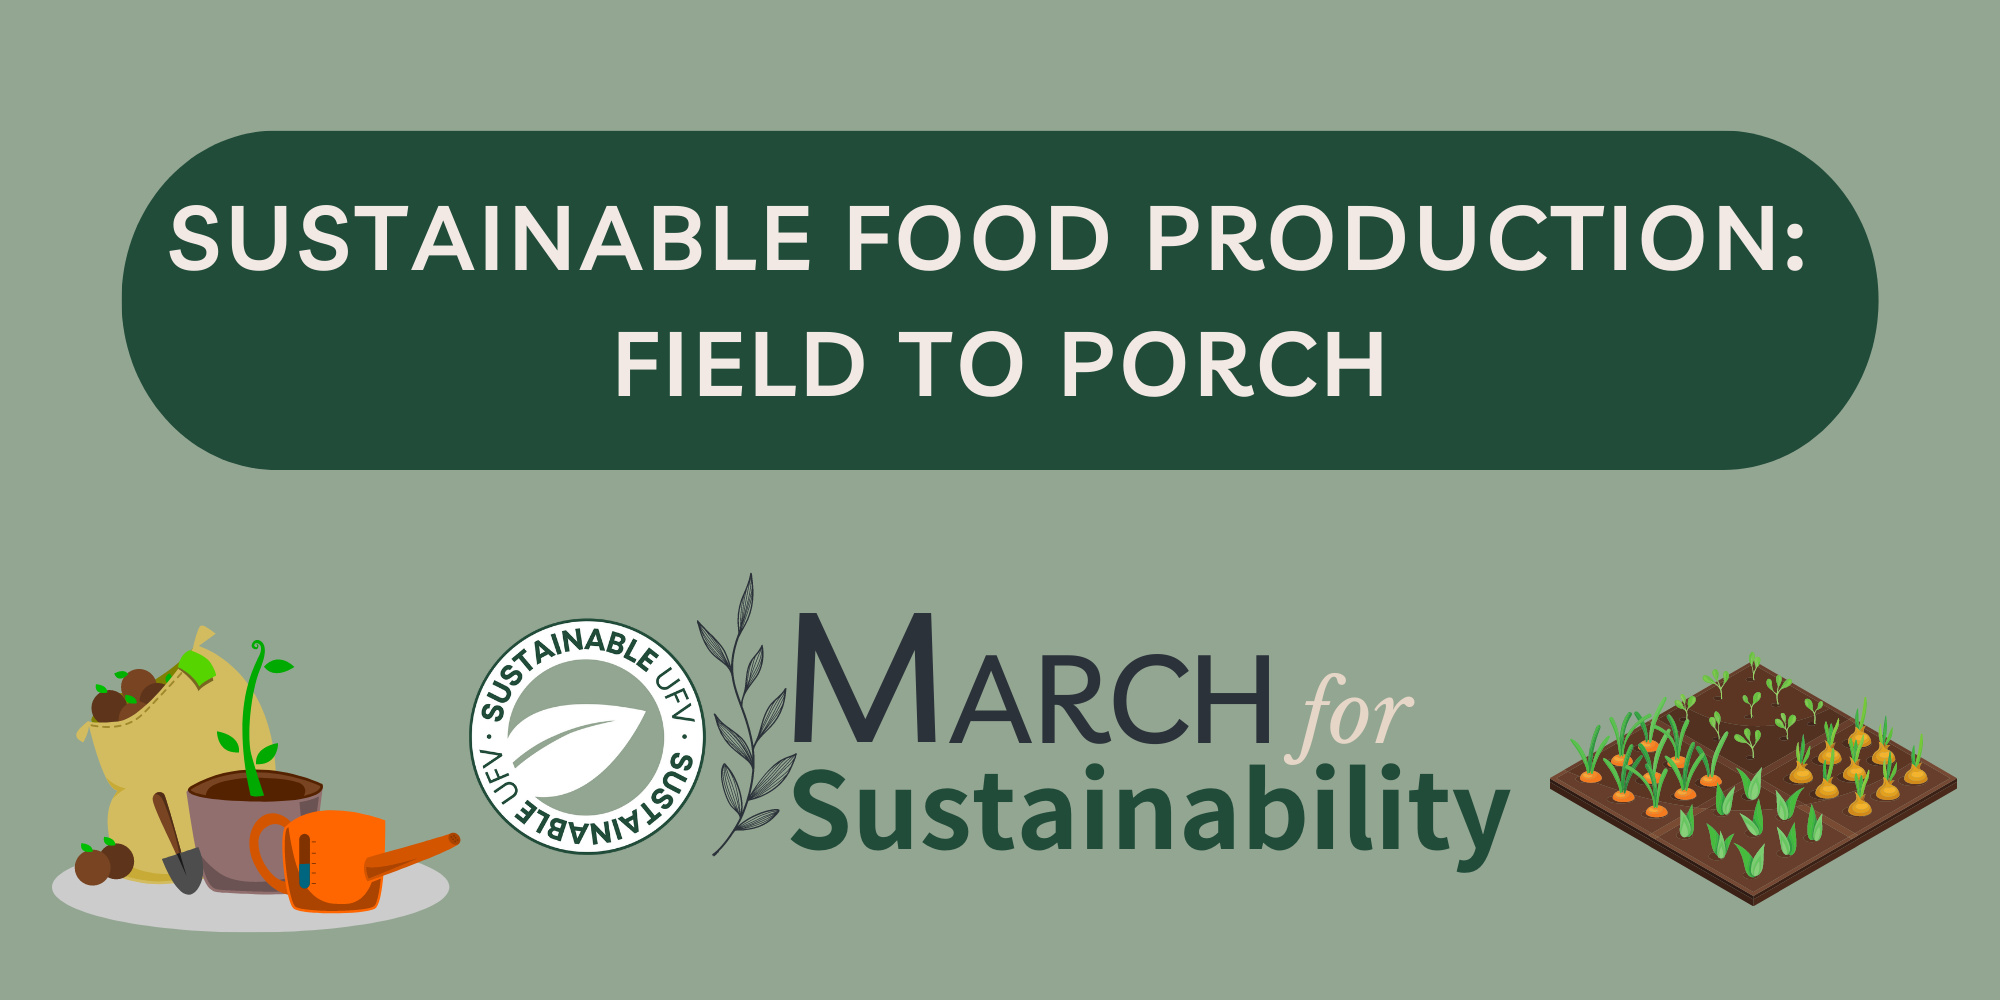 Sustainable Food Production: Field to Porch